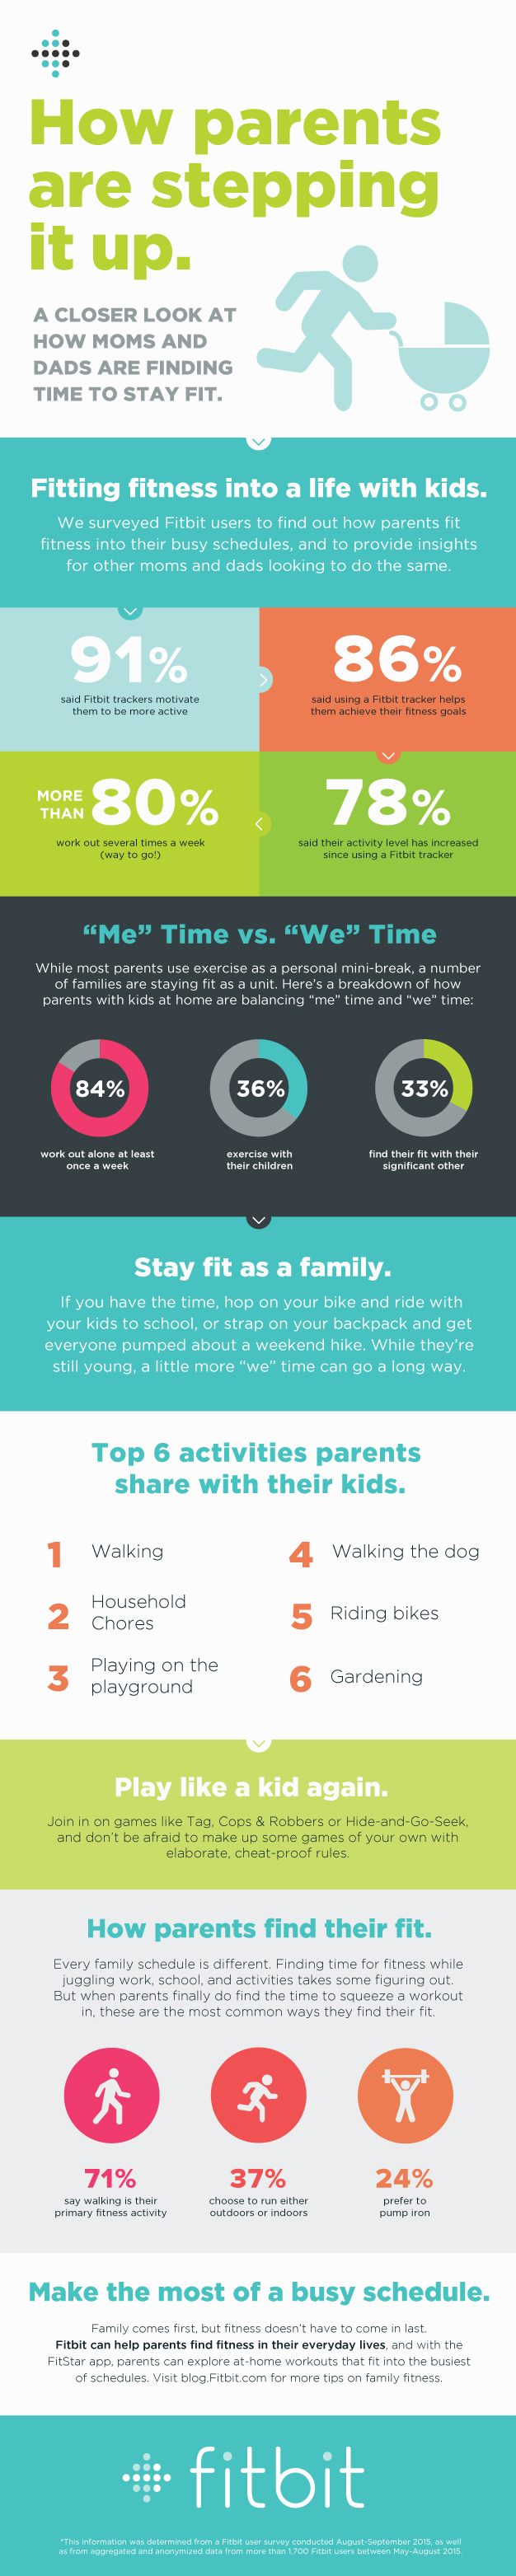 Fitbit Infographic